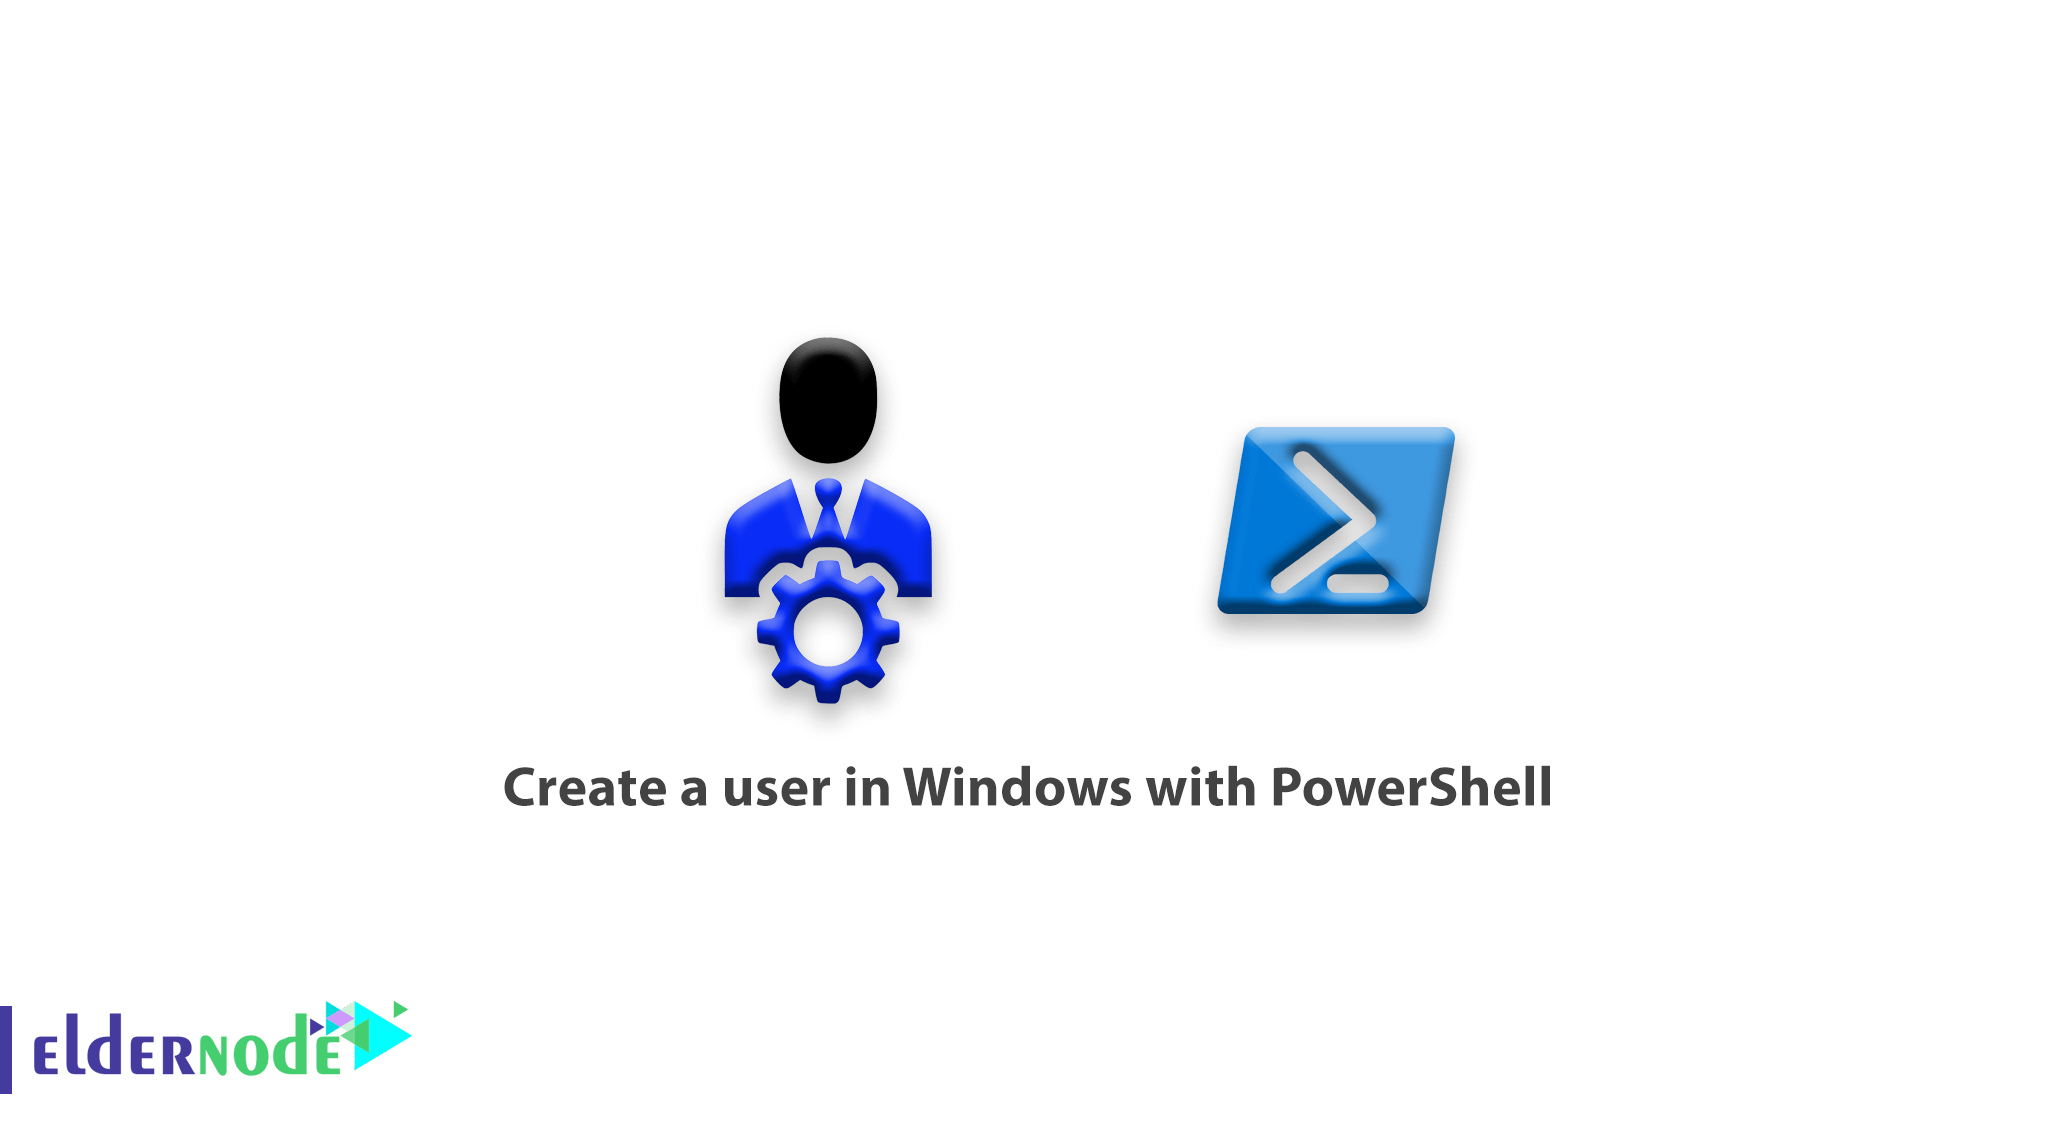 How to Create a user in Windows with PowerShell